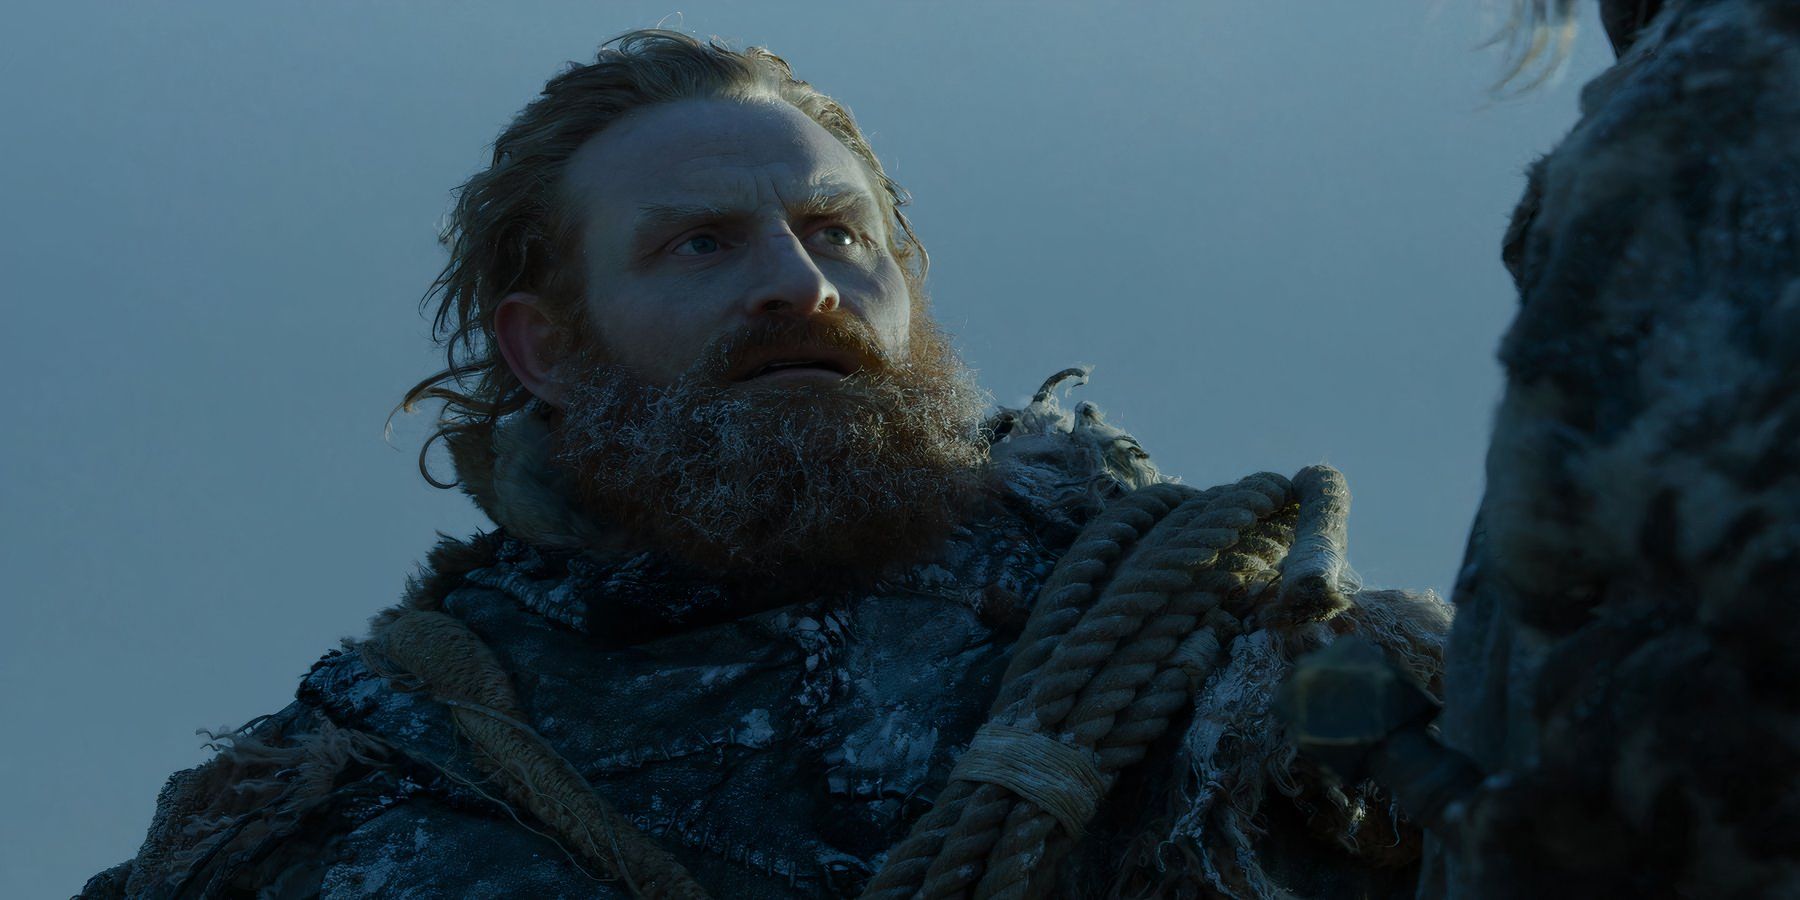 Tormund Giantsbane speaking with The Hound beyond the wall in Game of Thrones